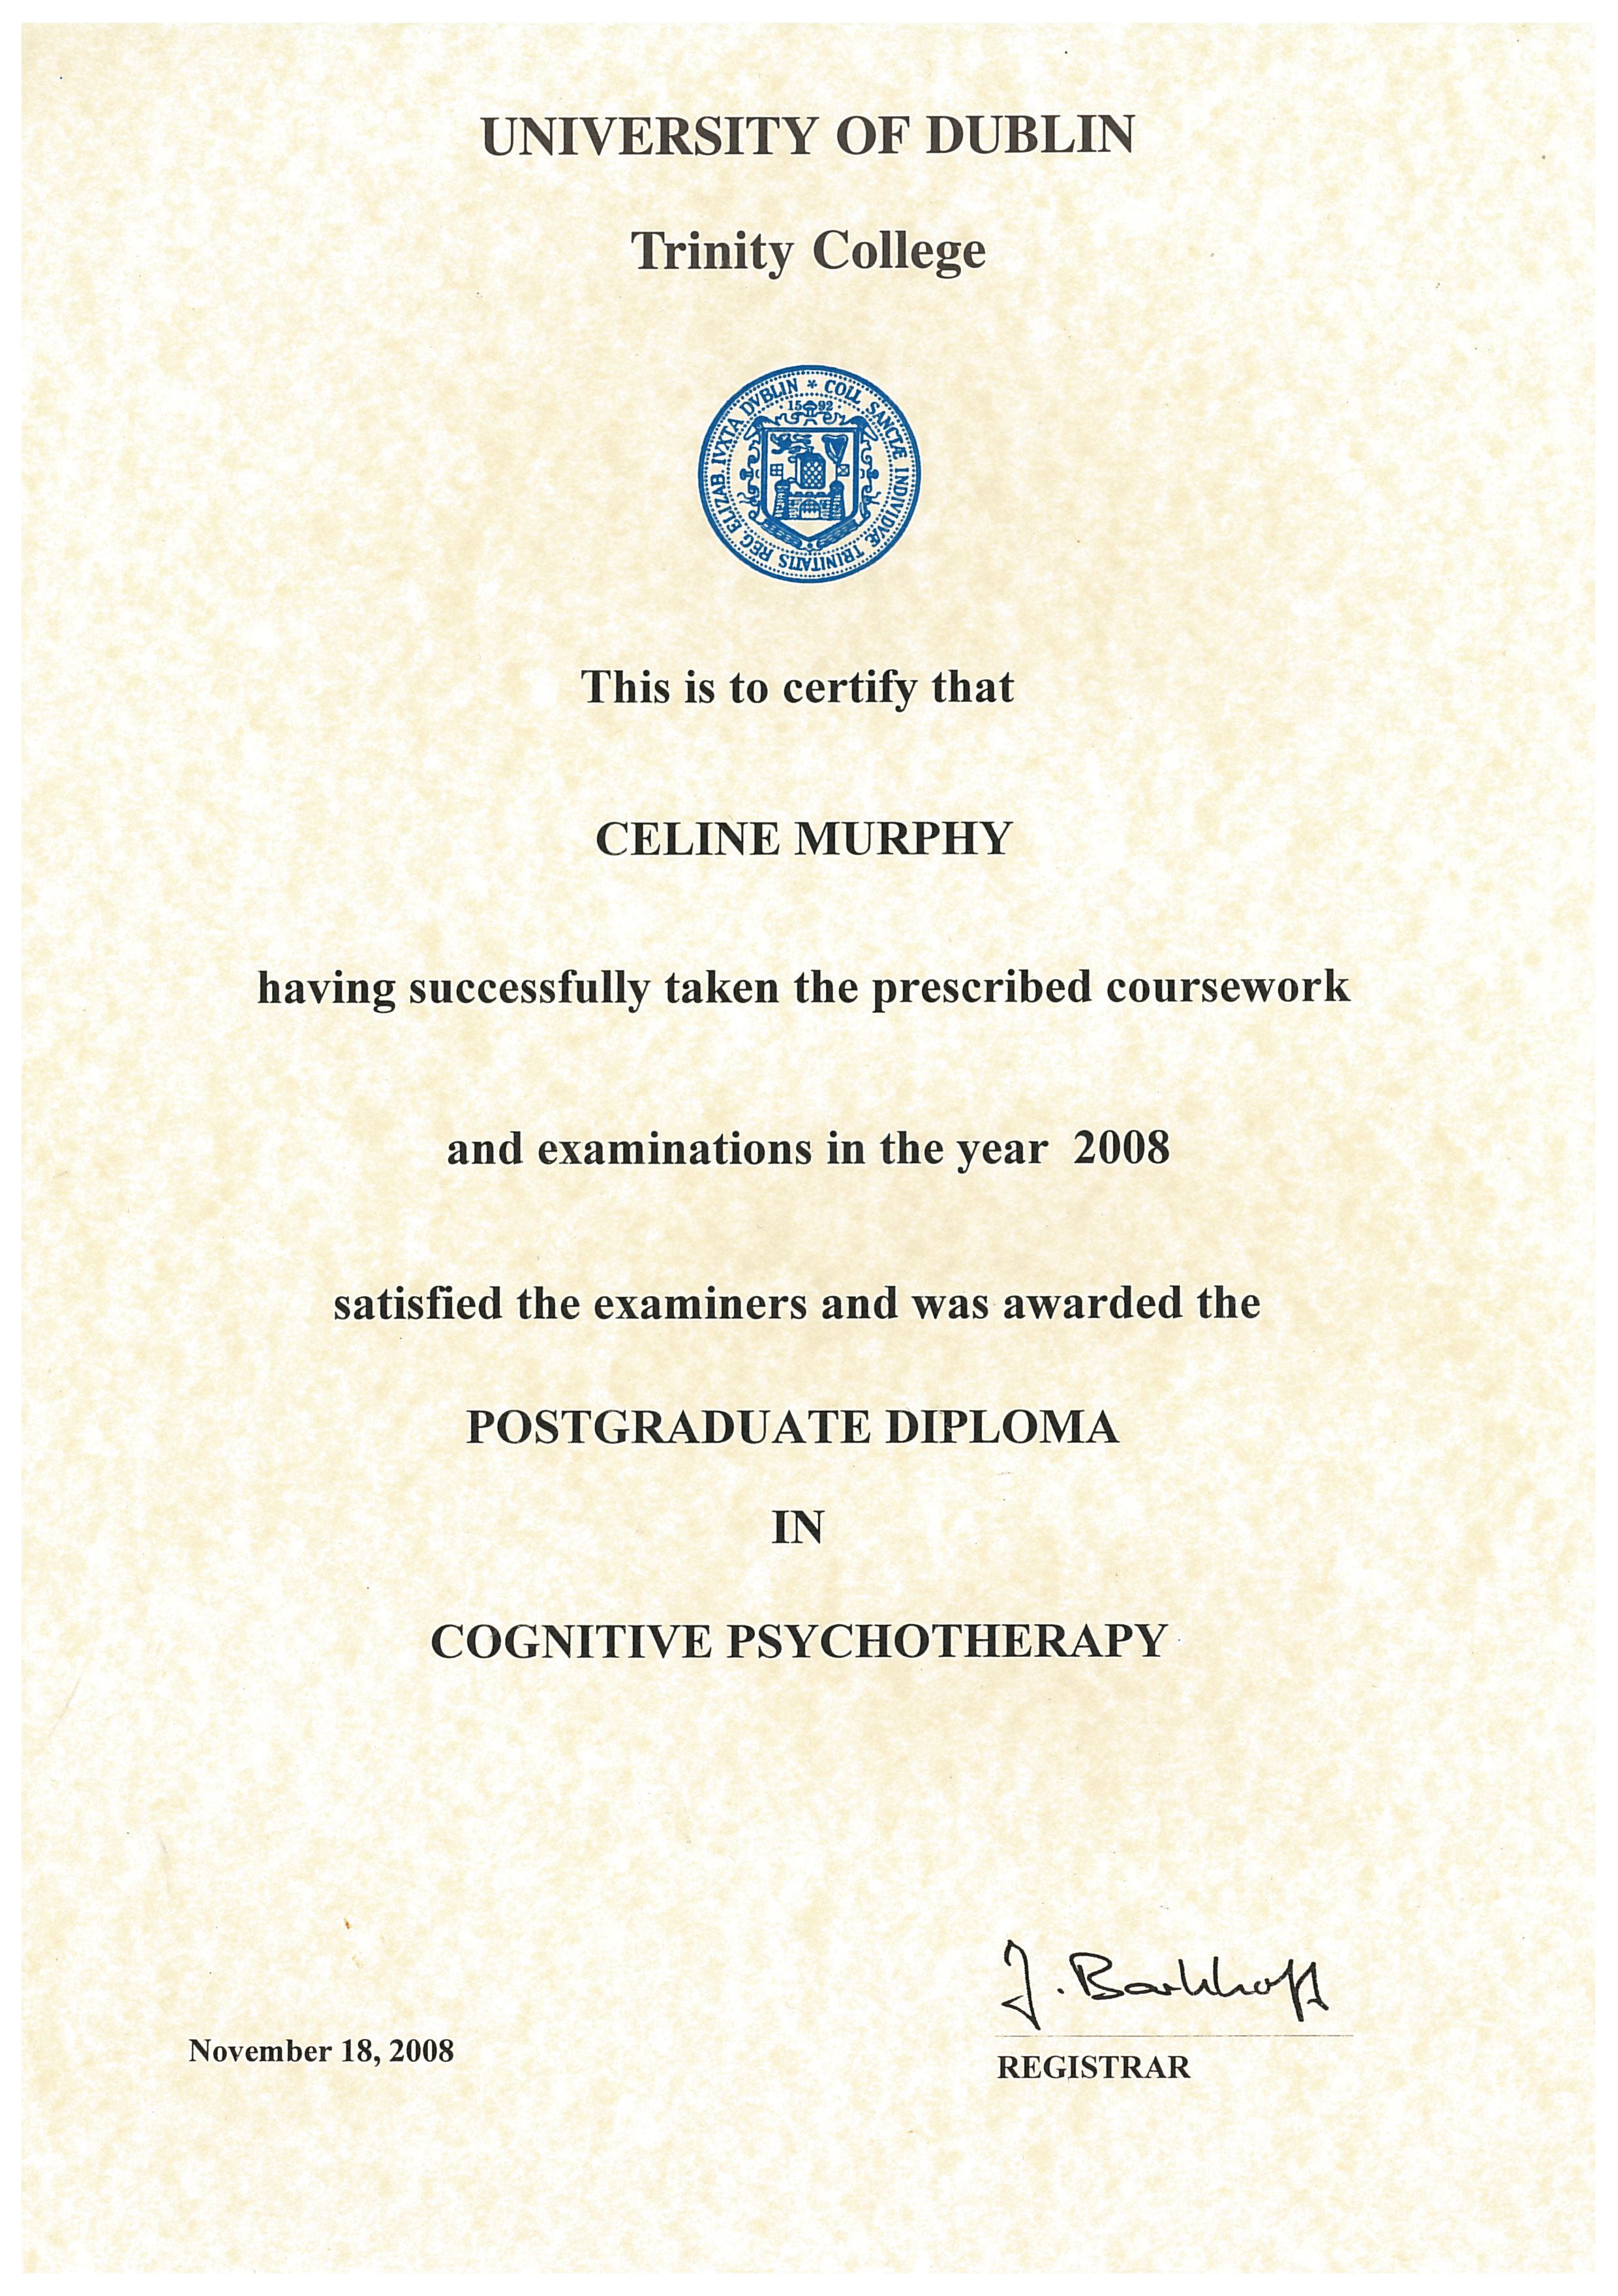 Diploma Cognitive Psychotherapy